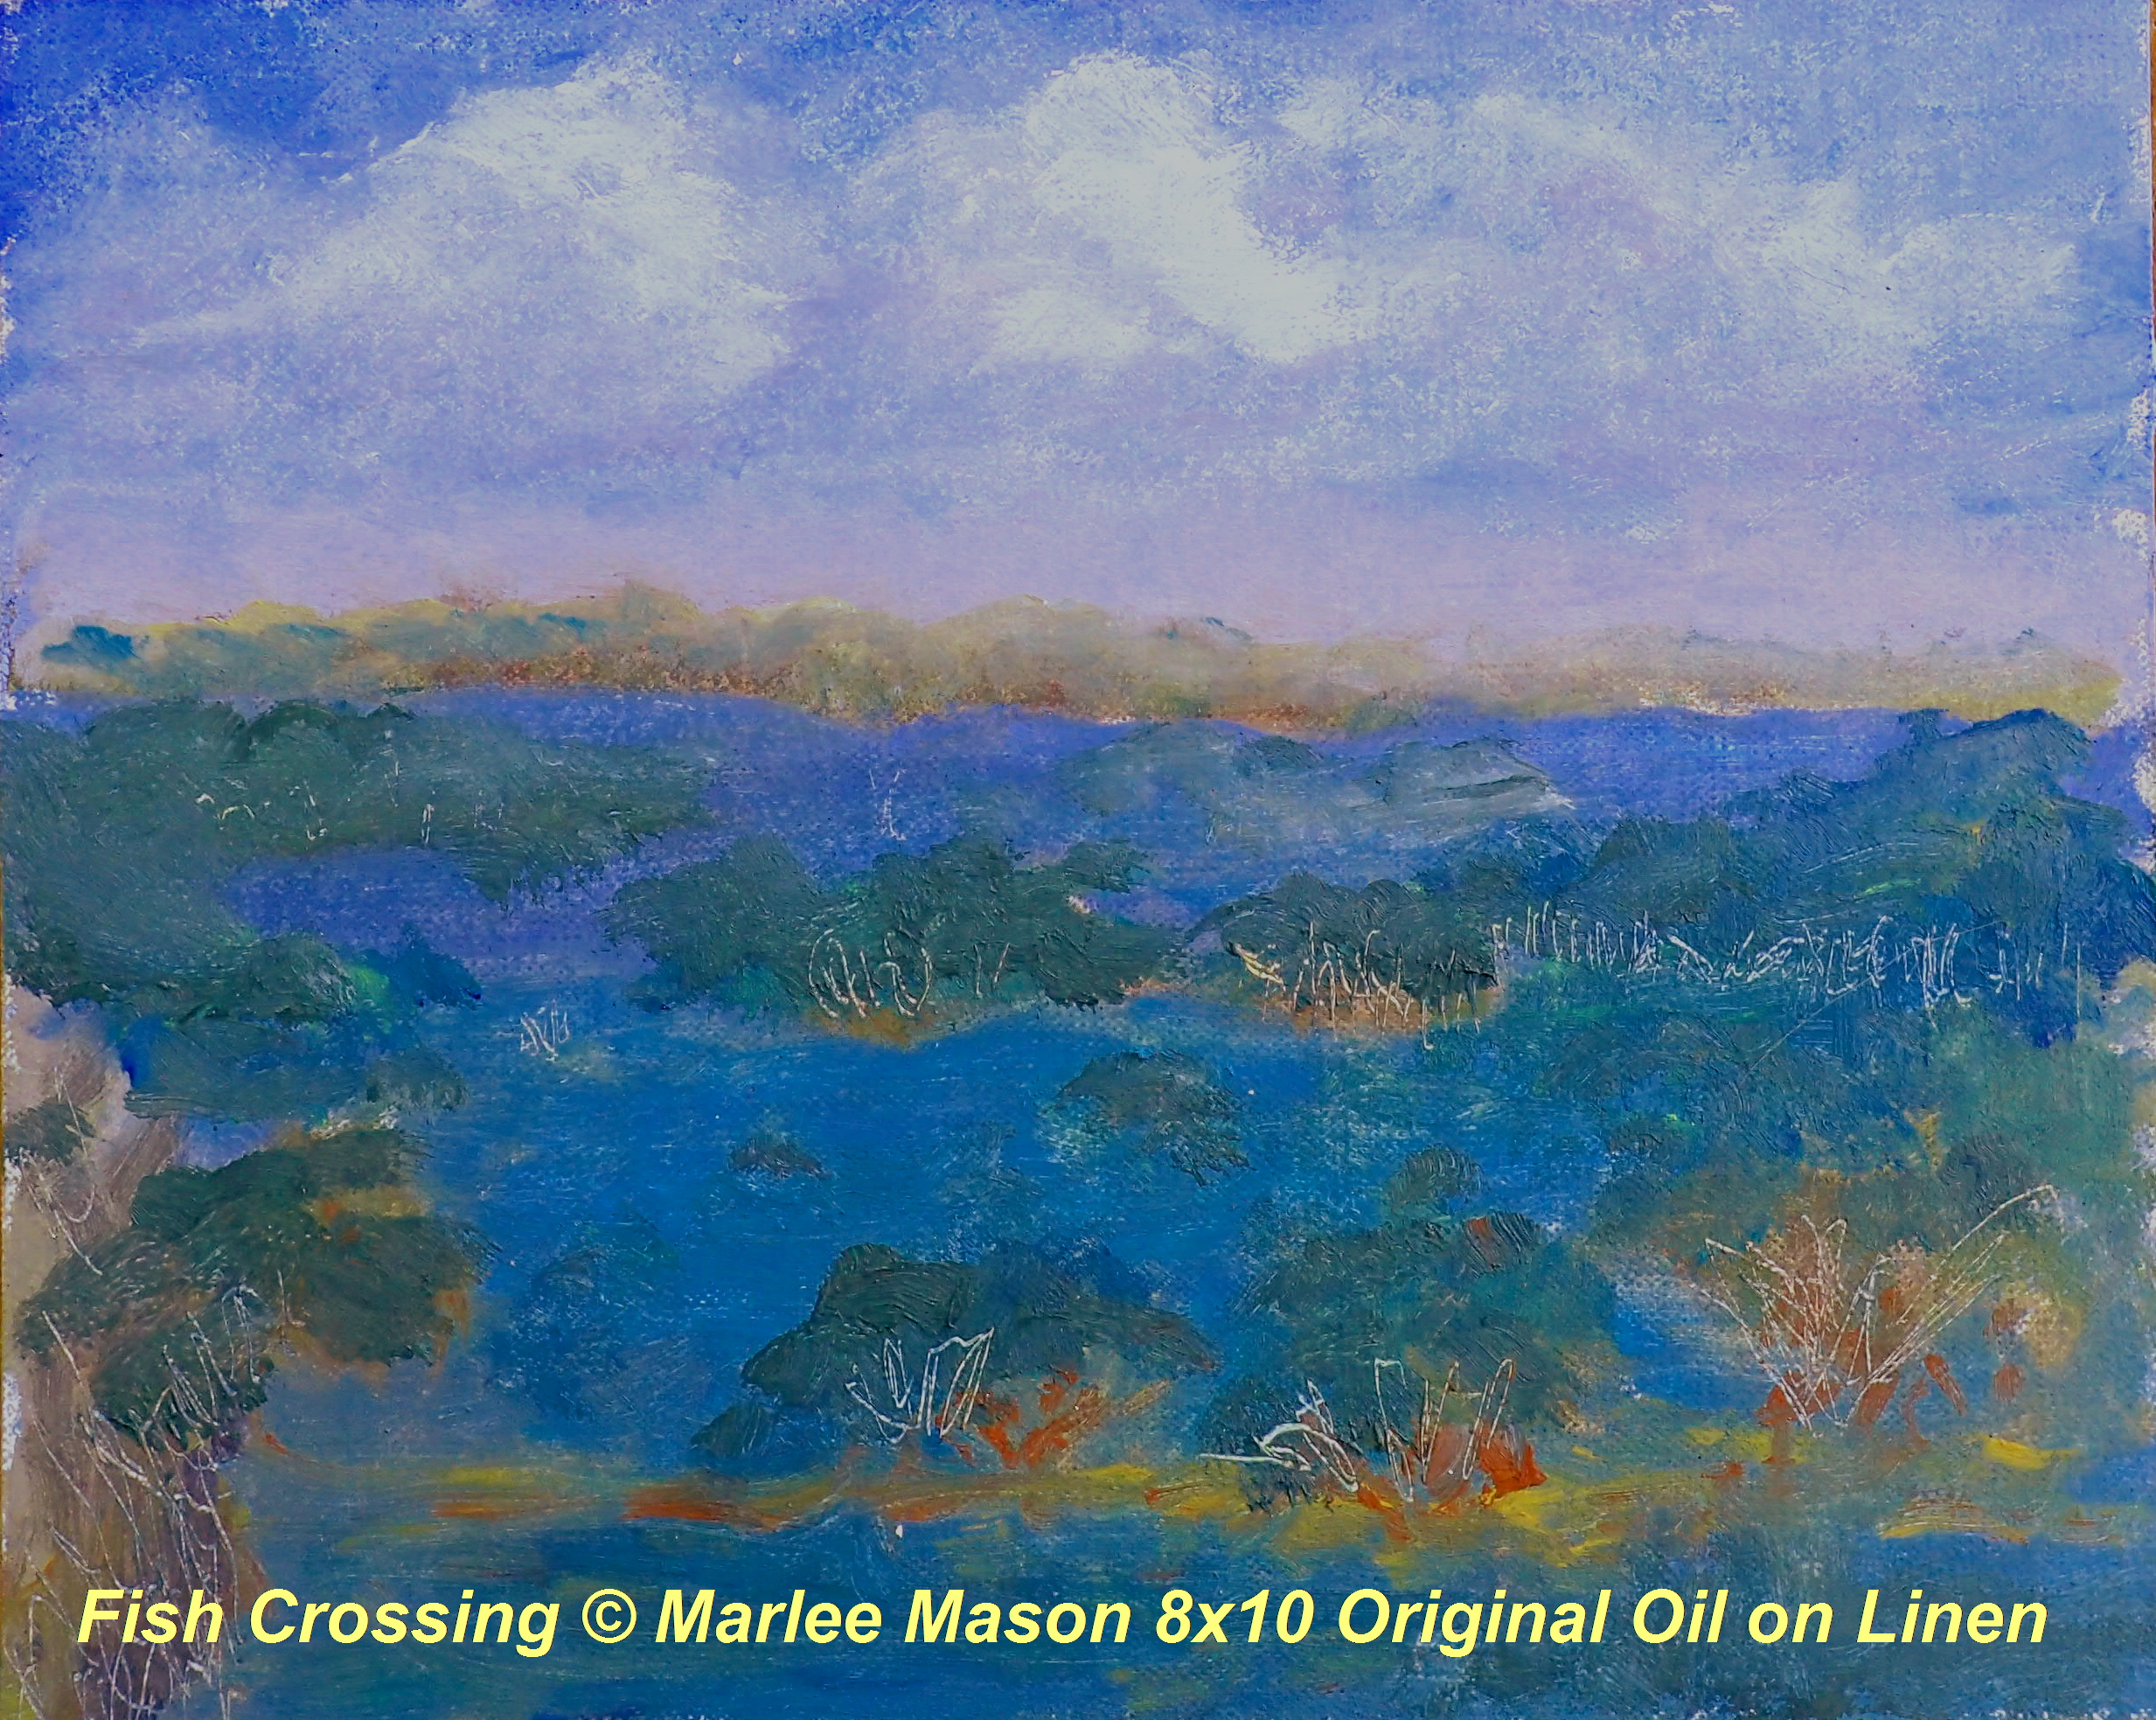 8x10 Original Plein Air on Linen.  Several years ago the Friends of The Environment created a culvert on the road to Camp Abaco to allow the fish to reproduce in the shallow mangrove area and flow bac